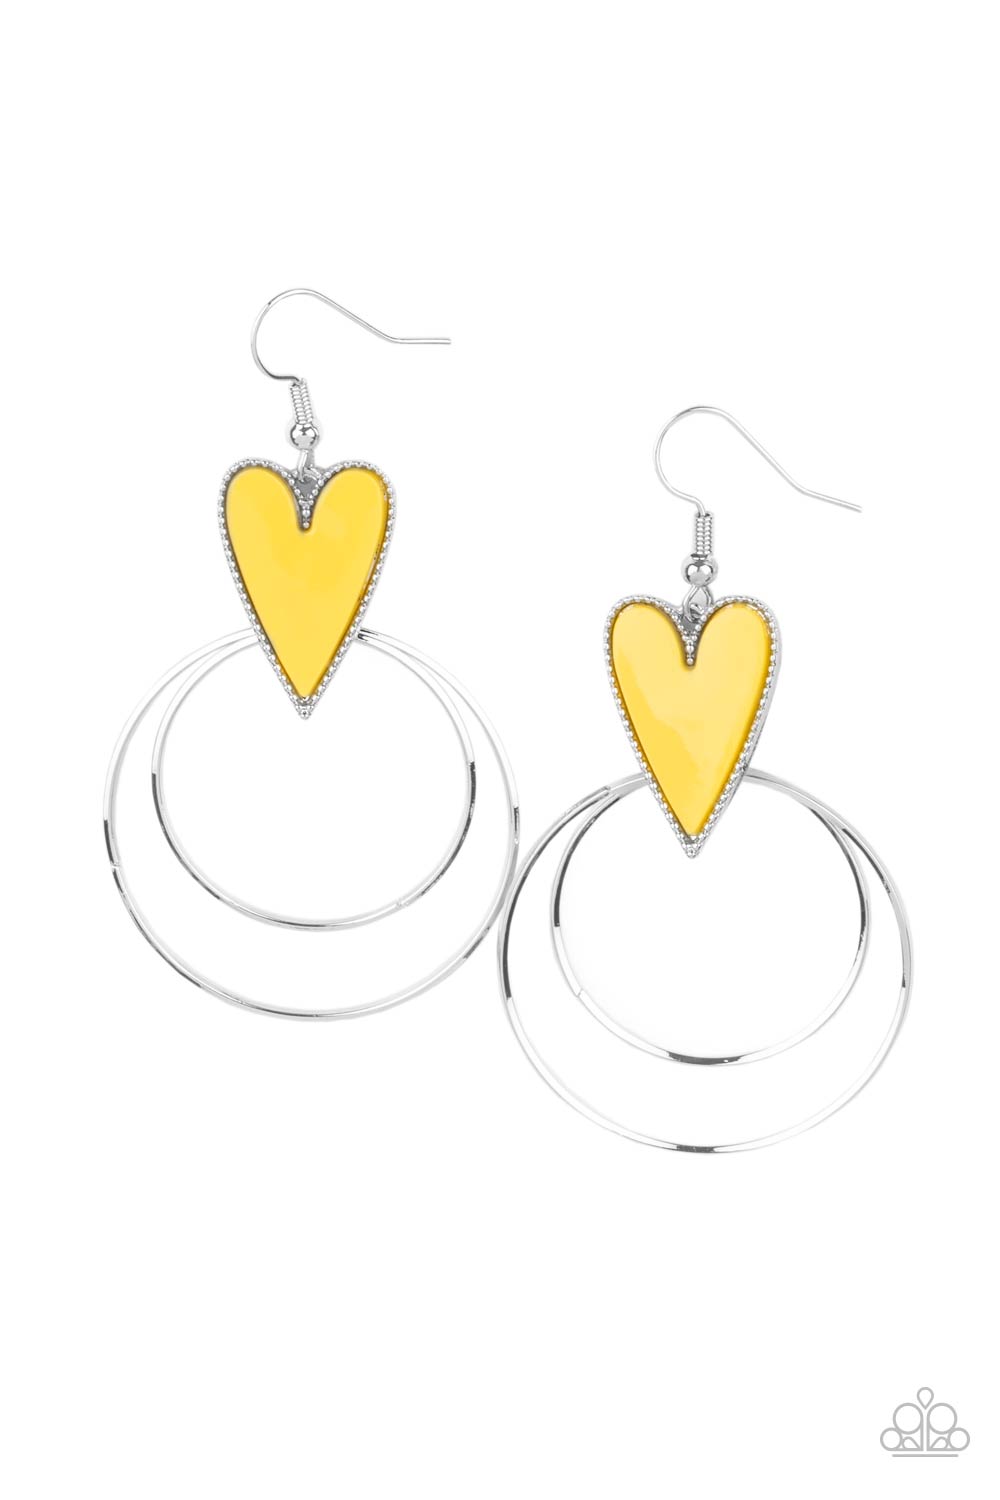 Happily Ever Hearts Yellow Heart Earrings - Paparazzi Accessories- lightbox - CarasShop.com - $5 Jewelry by Cara Jewels